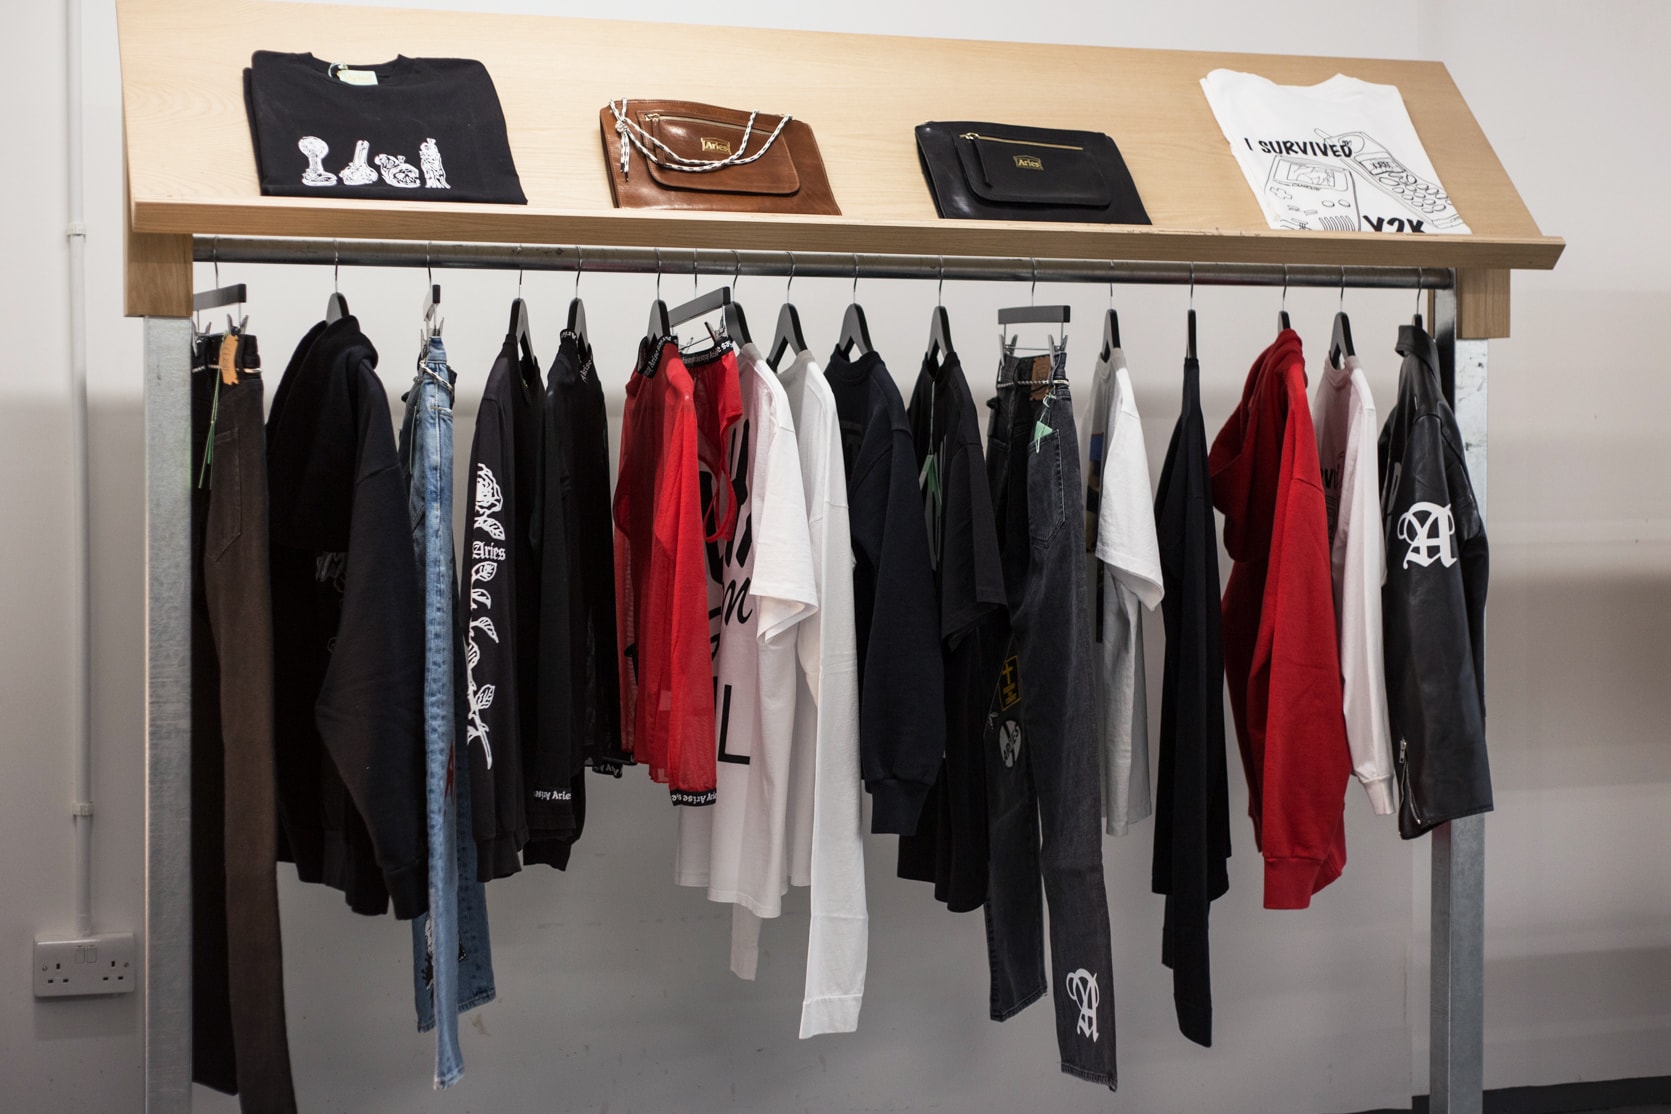 Aries London Sofia Prantera Fergus Purcell Slam Jam Martine Rose Vans Ashley Williams Thames ASSID Brain Dead Exclusive Releases Collaborations New Balances Planet Store First Look Inside Closer Covent Garden